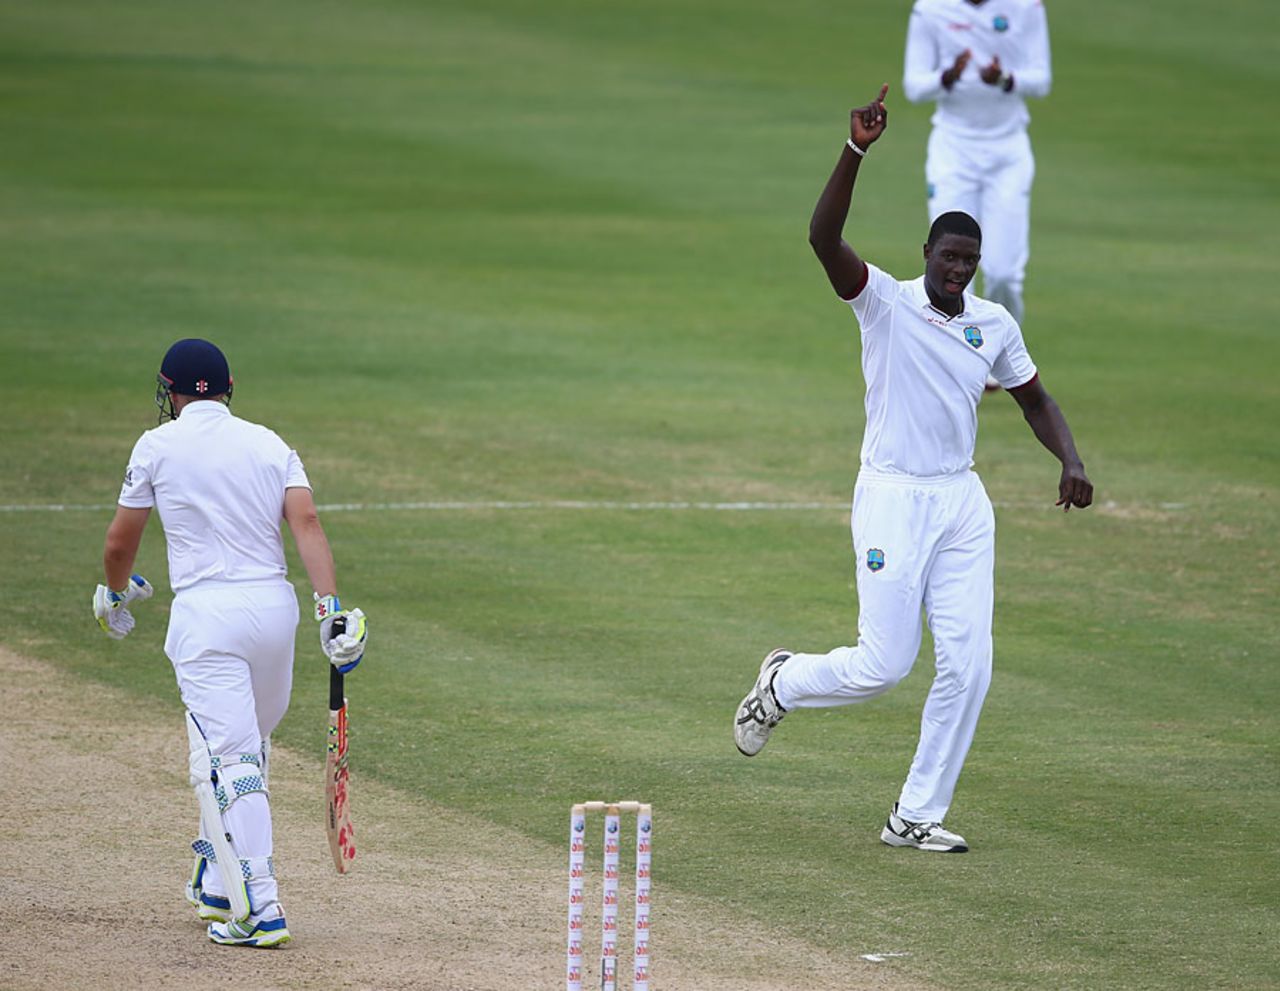 Jason Holder had James Tredwell edging into the slips, West Indies v England, 1st Test, North Sound, 2nd day, April 14, 2015